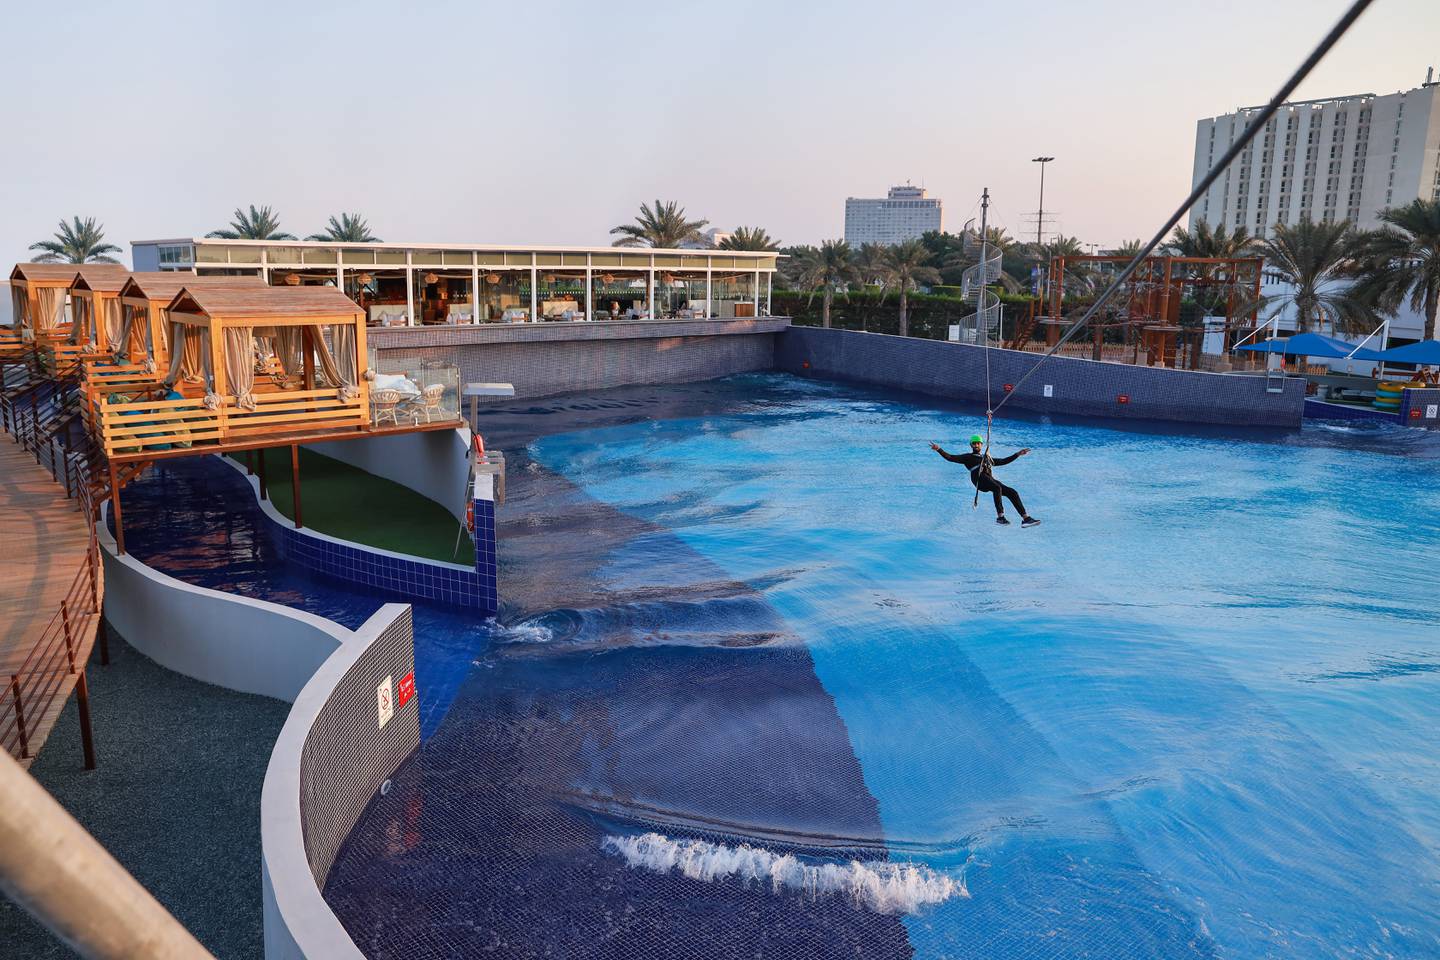 The lazy river and wave pool at West Bay Abu Dhabi. Photo: West Bay Abu Dhabi 